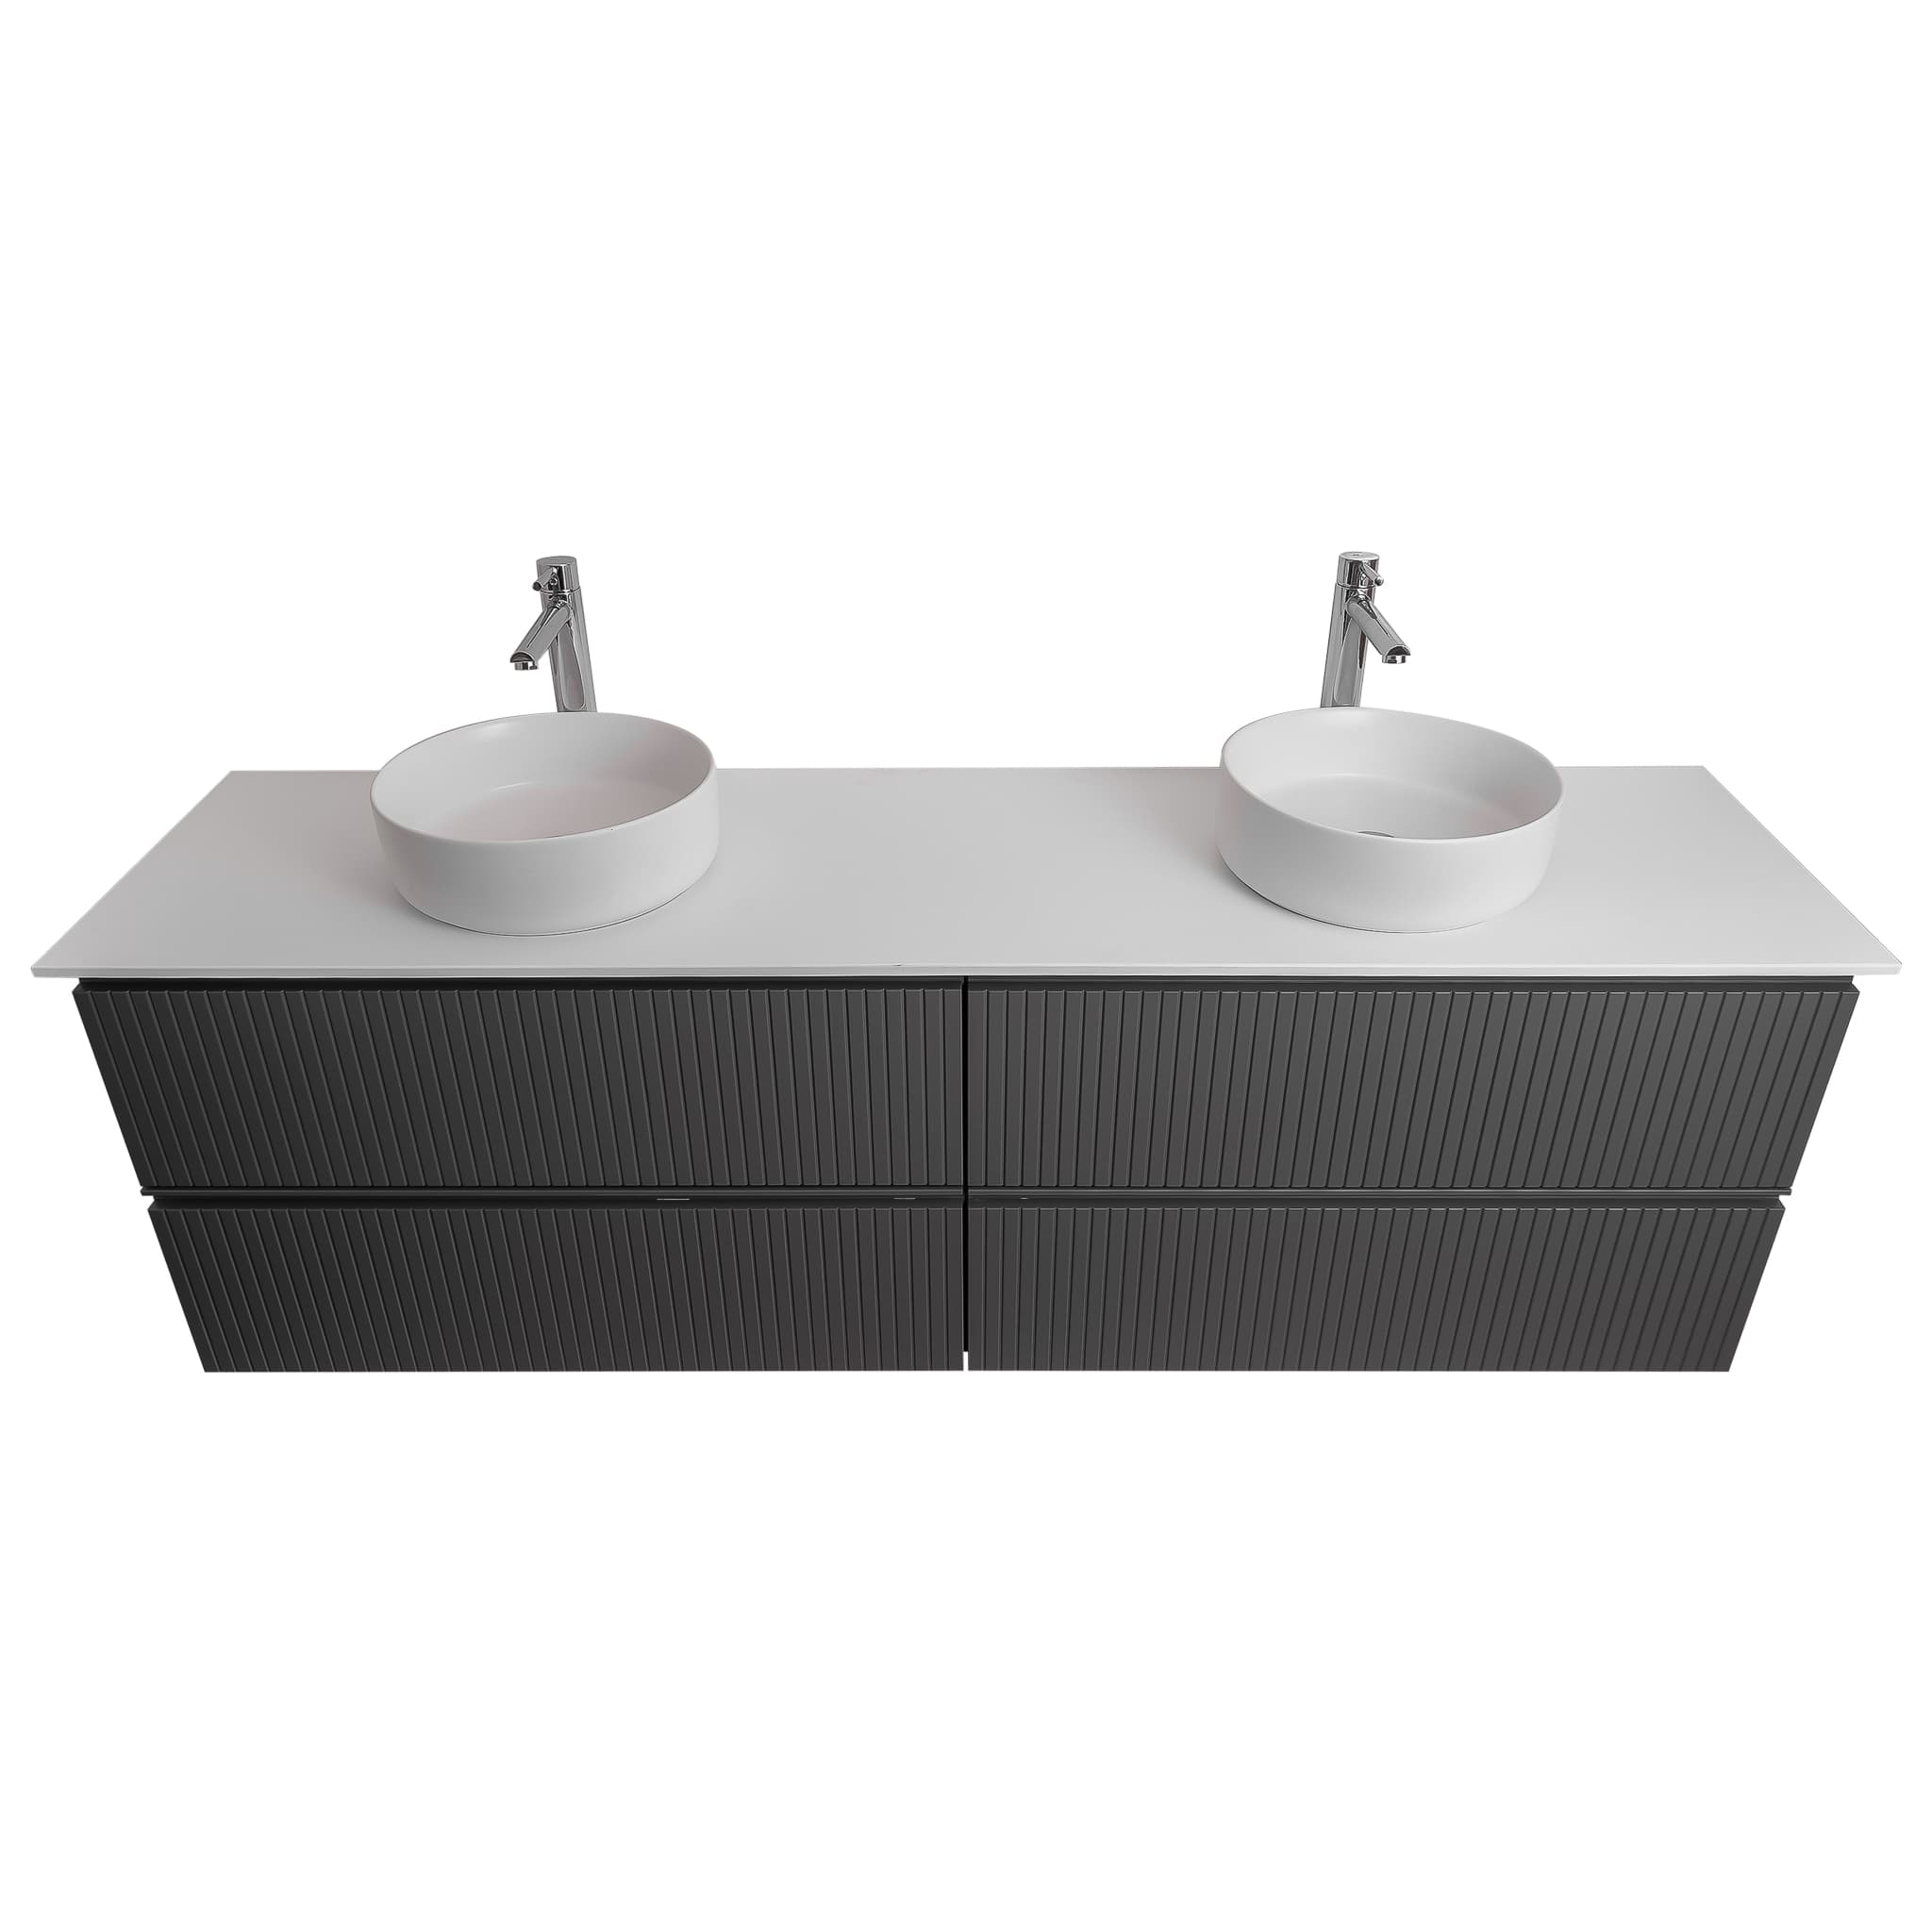 Ares 63 Matte Grey Cabinet, Ares White Top And Two Ares White Ceramic Basin, Wall Mounted Modern Vanity Set